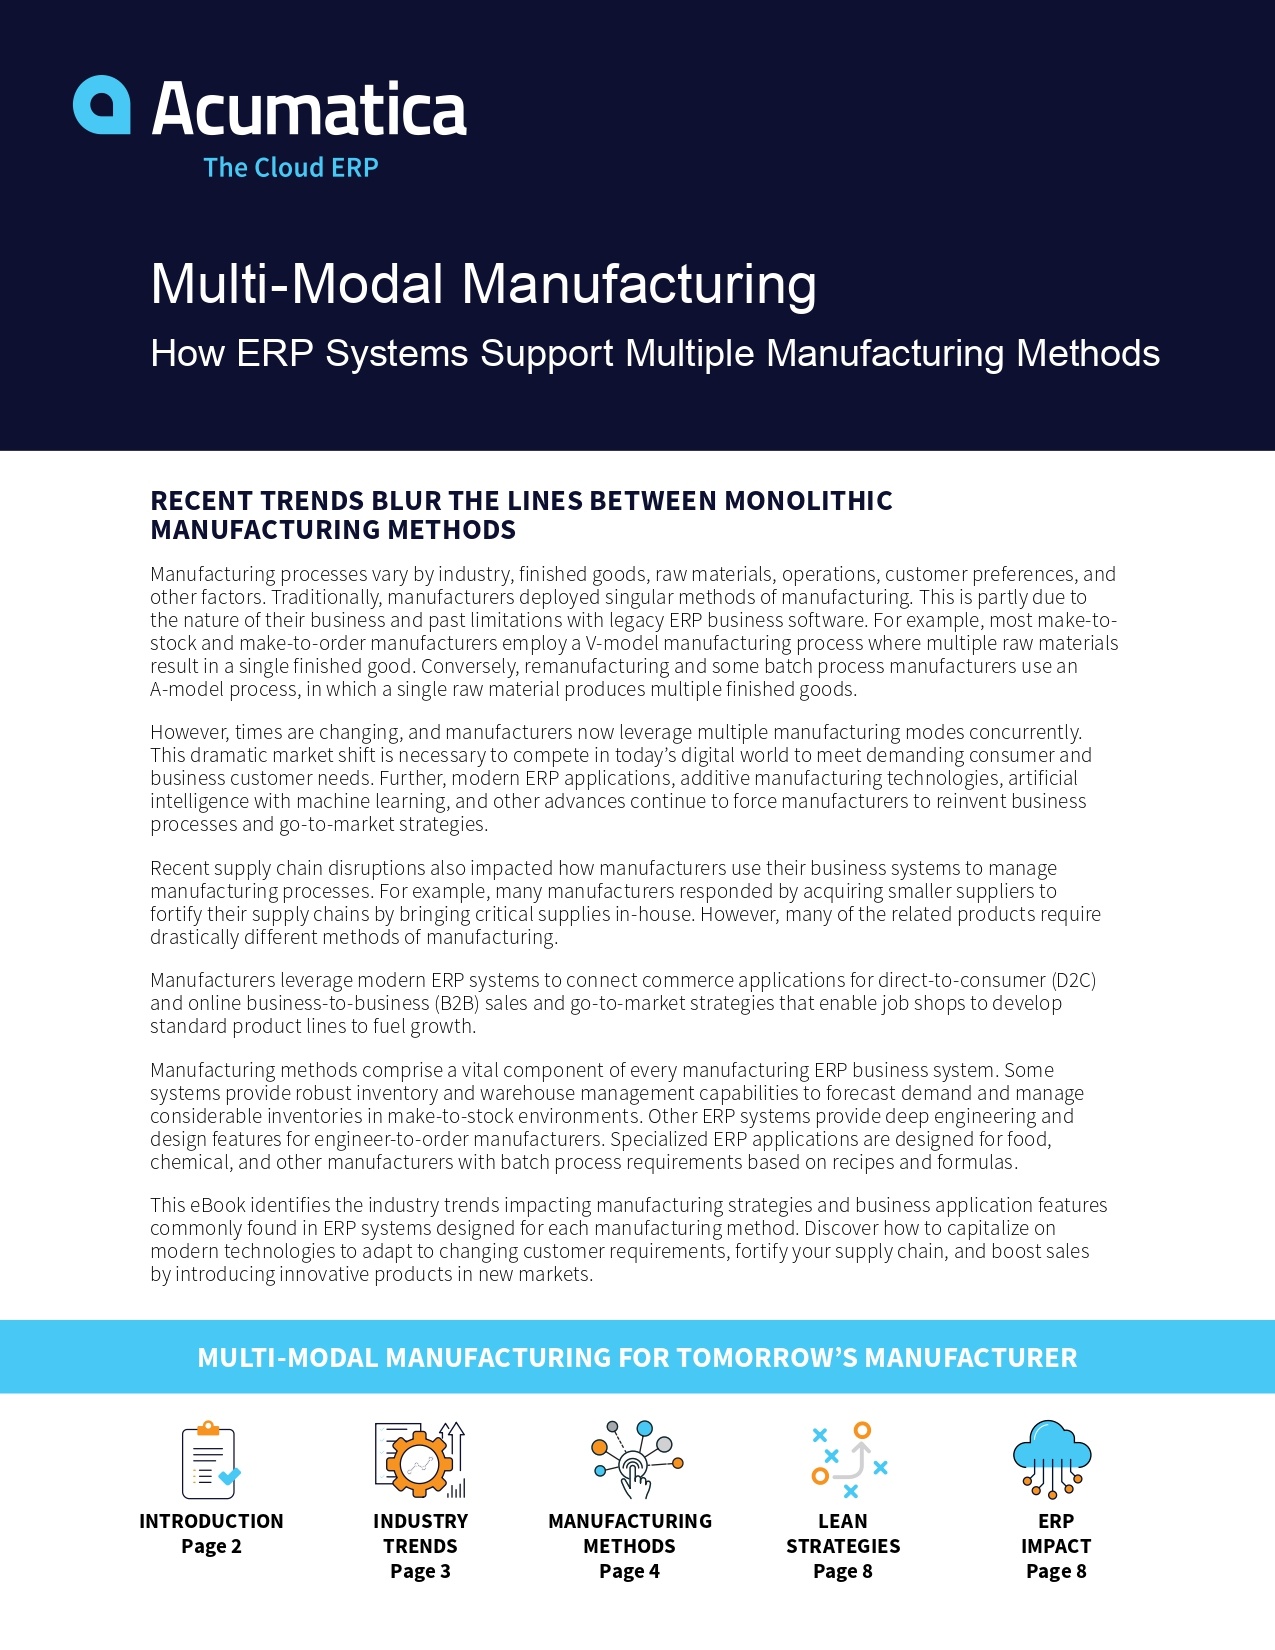 How to Support Multi-Modal Manufacturing with Acumatica